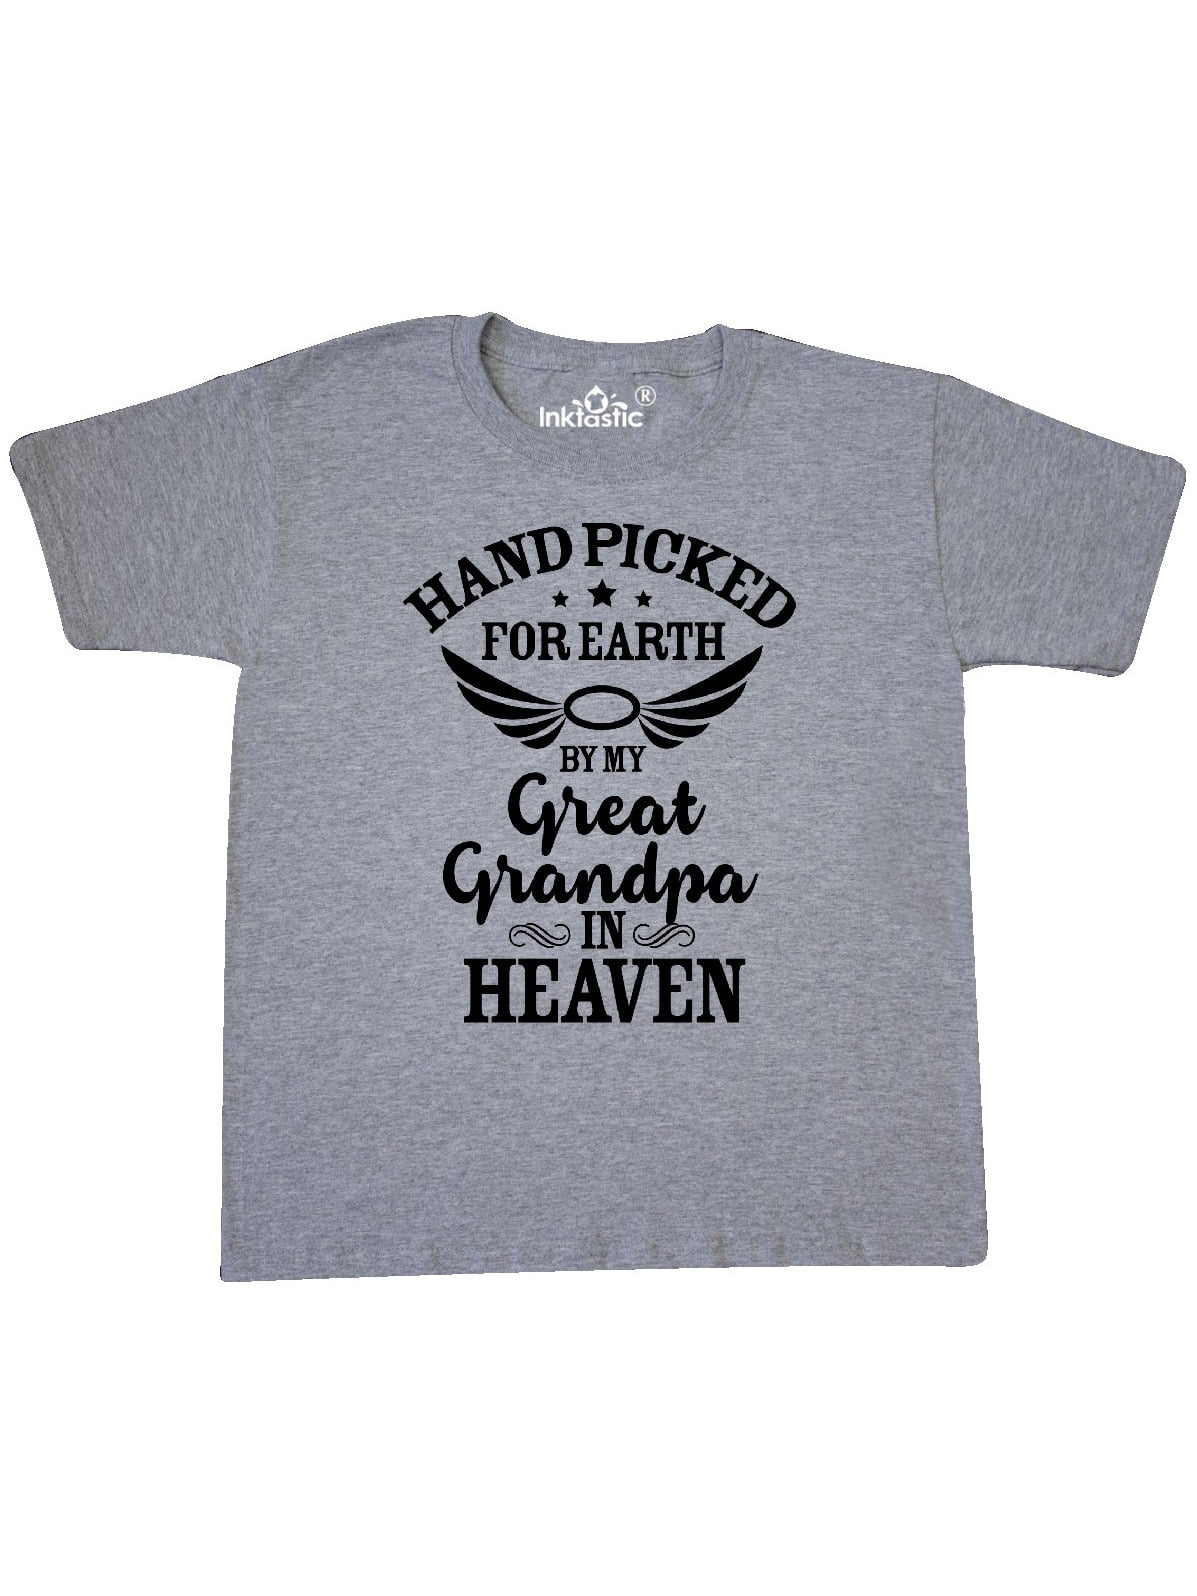 Handpicked for Earth By My Great Grandpa in Heaven Youth T-Shirt ...